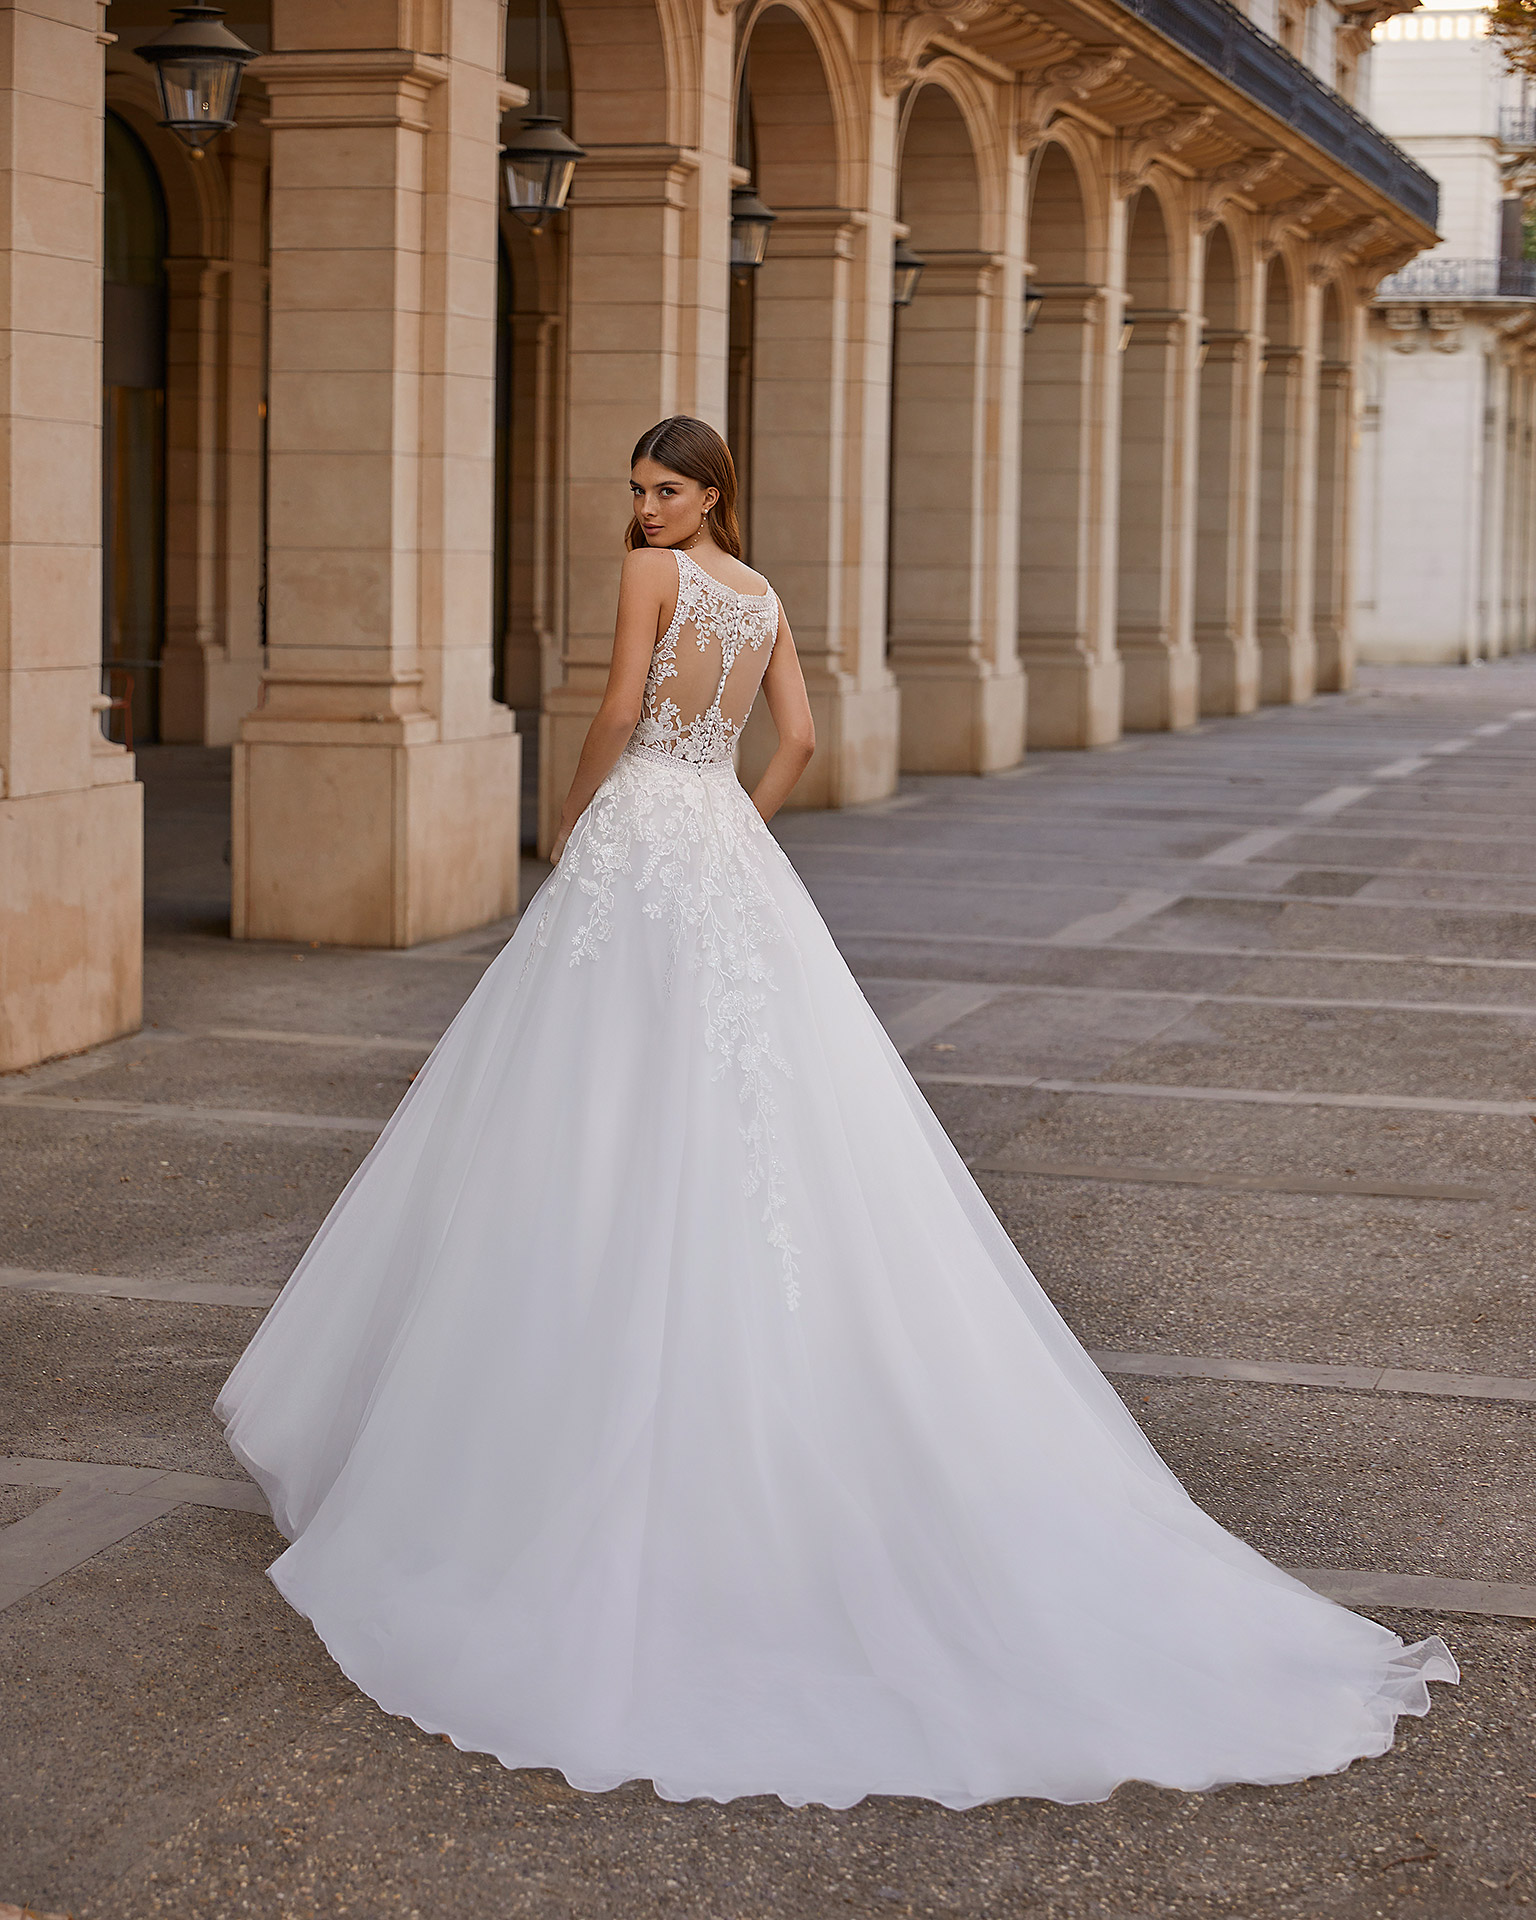 Princess-style A-line wedding dress, made of tulle with lace appliqués; with a deep-plunge neckline, and a button-up back with sheer inserts. Exclusive Luna Novias dress made of tulle with beadwork and lace appliqués. LUNA_NOVIAS.